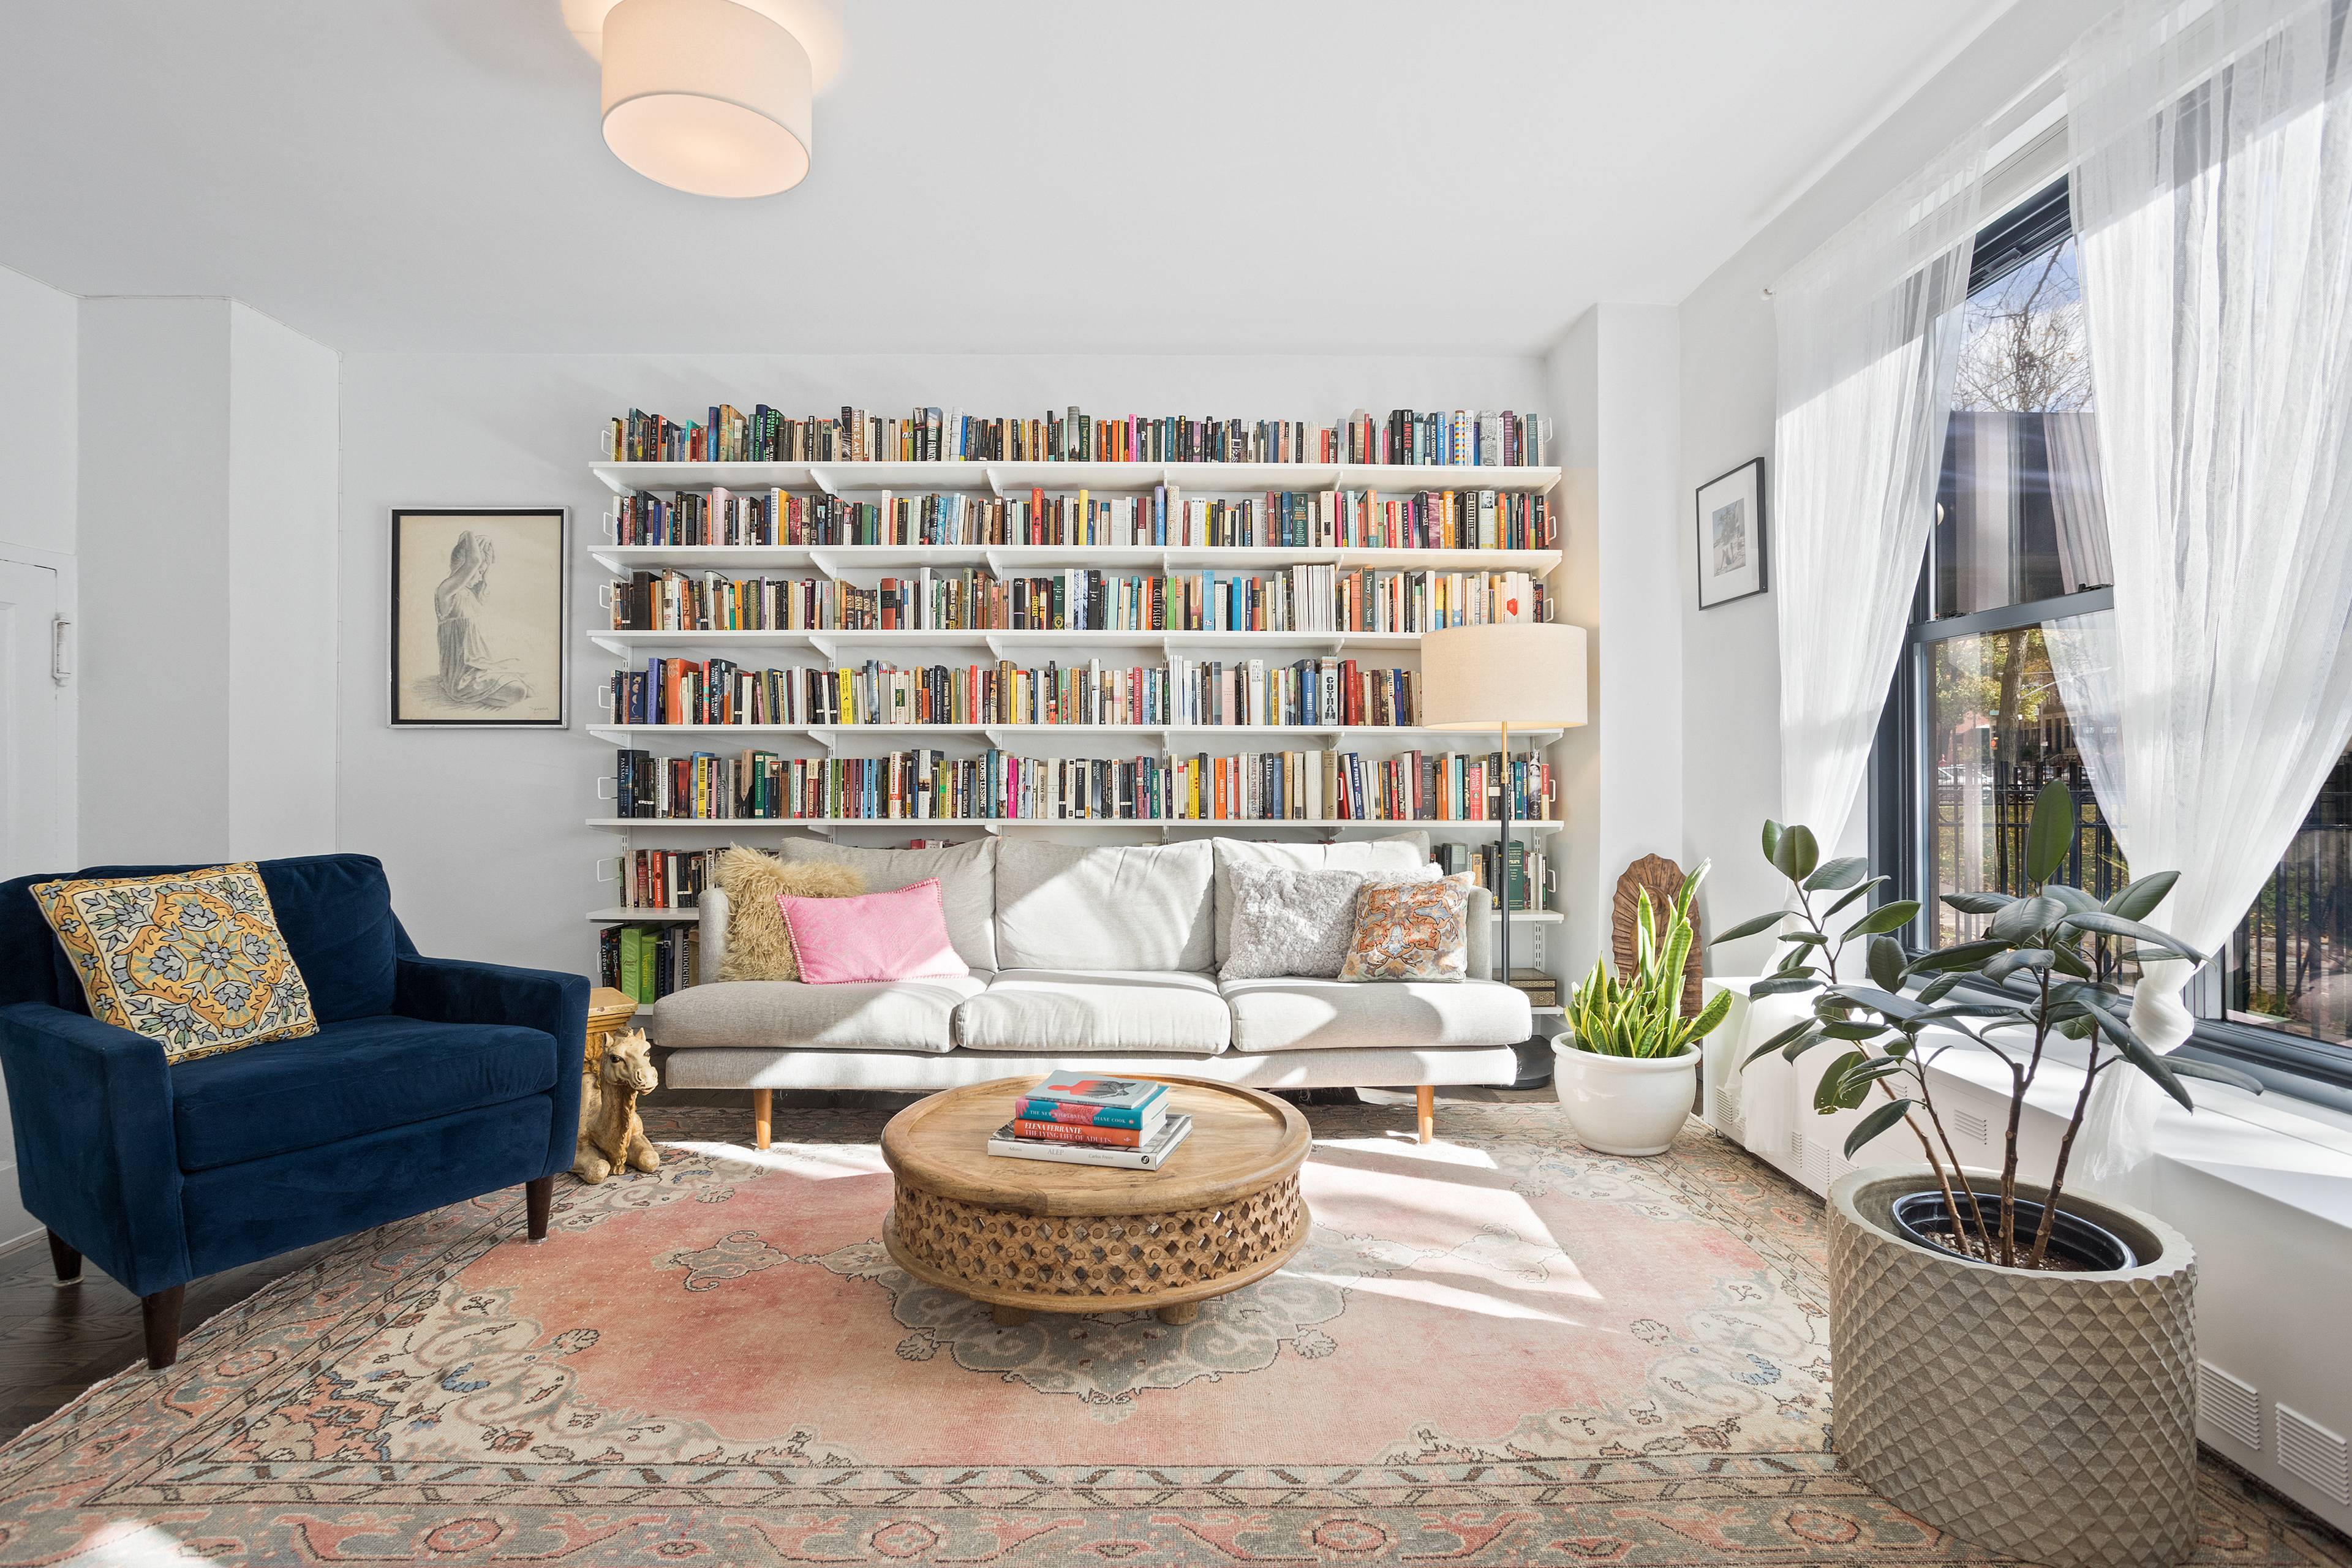 This serene, sophisticated Clinton Hill Coop corner one bedroom apartment has been renovated to perfection, and could easily be configured to add a second bedroom or home office.